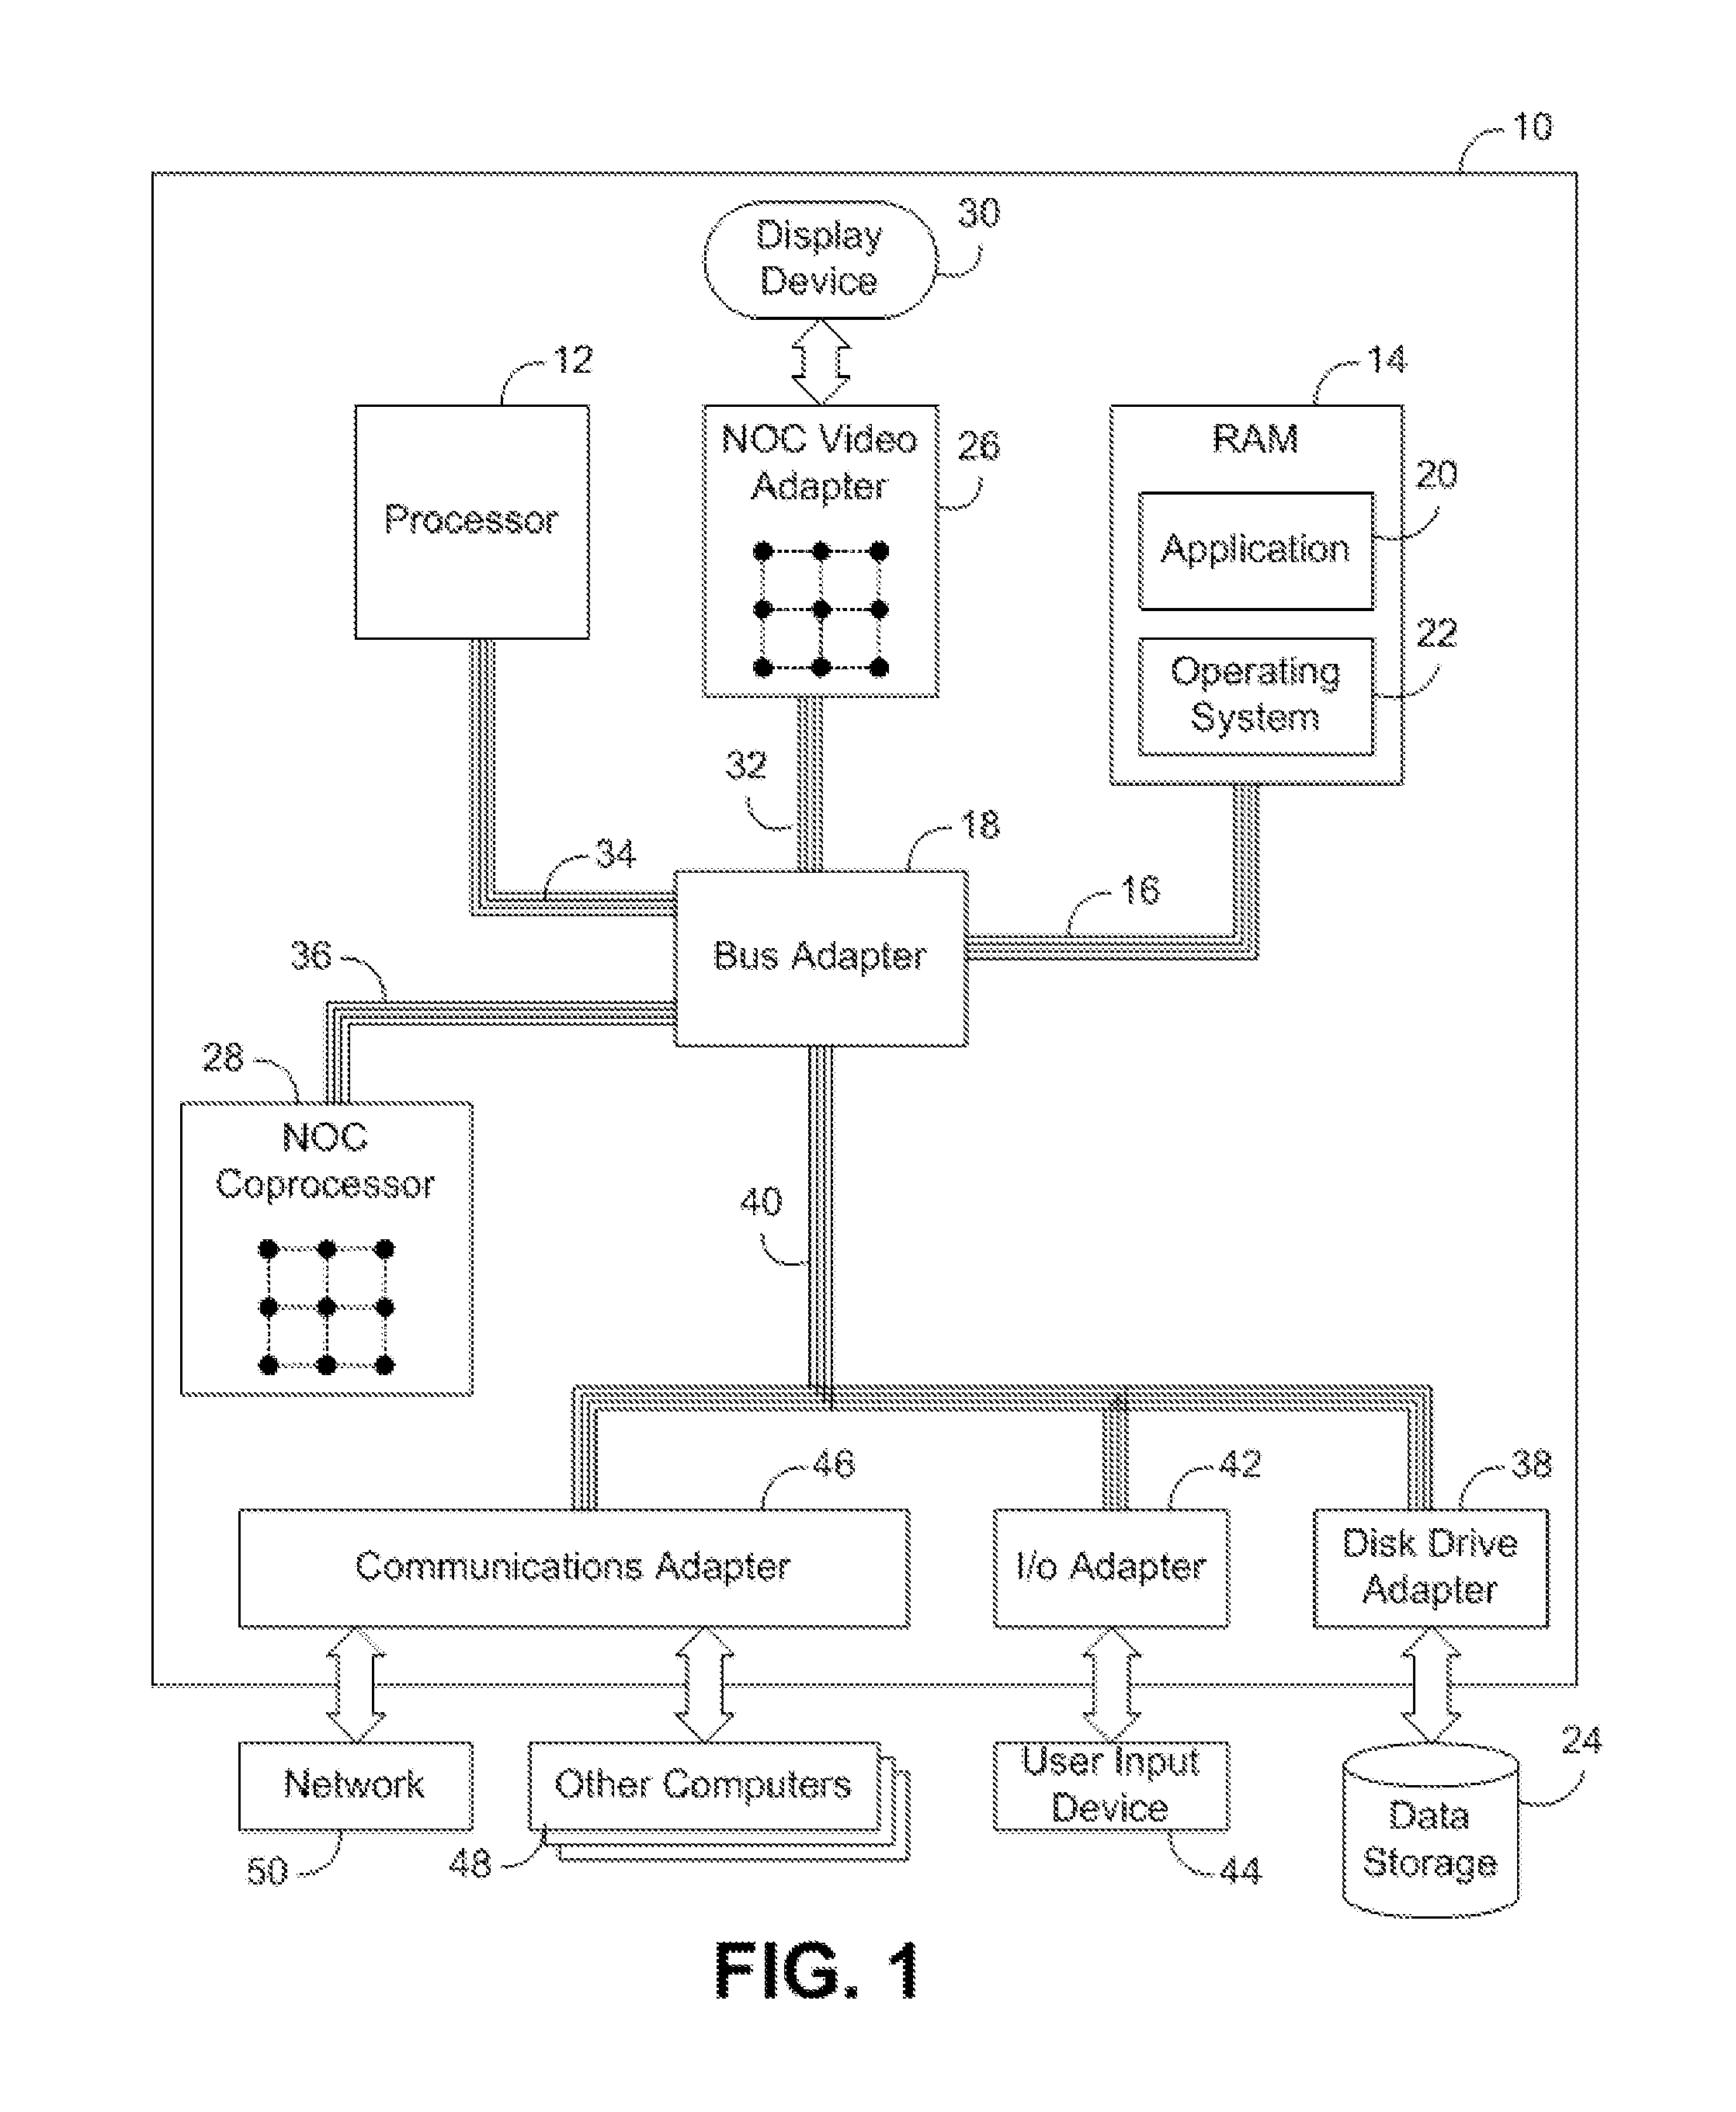 System and method for selectively saving and restoring state of branch prediction logic through separate hypervisor-mode and guest-mode and/or user-mode instructions